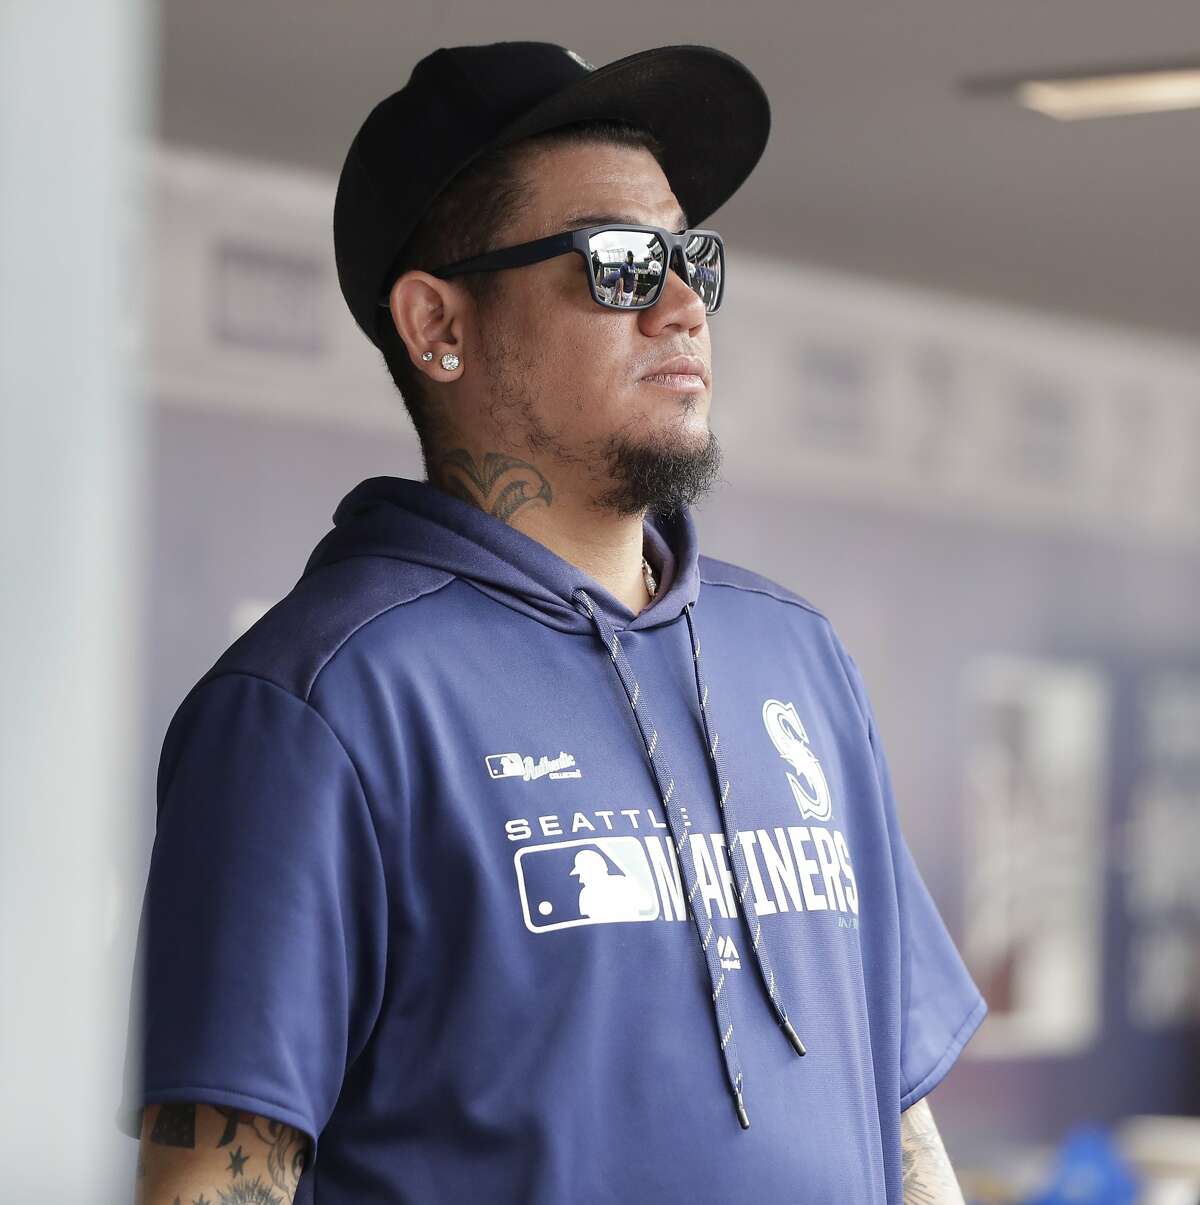 Seattle Mariners pitcher Felix Hernandez stands in the dugout during a baseball game against the Detroit Tigers, Saturday, July 27, 2019, in Seattle. (AP Photo/Ted S. Warren)